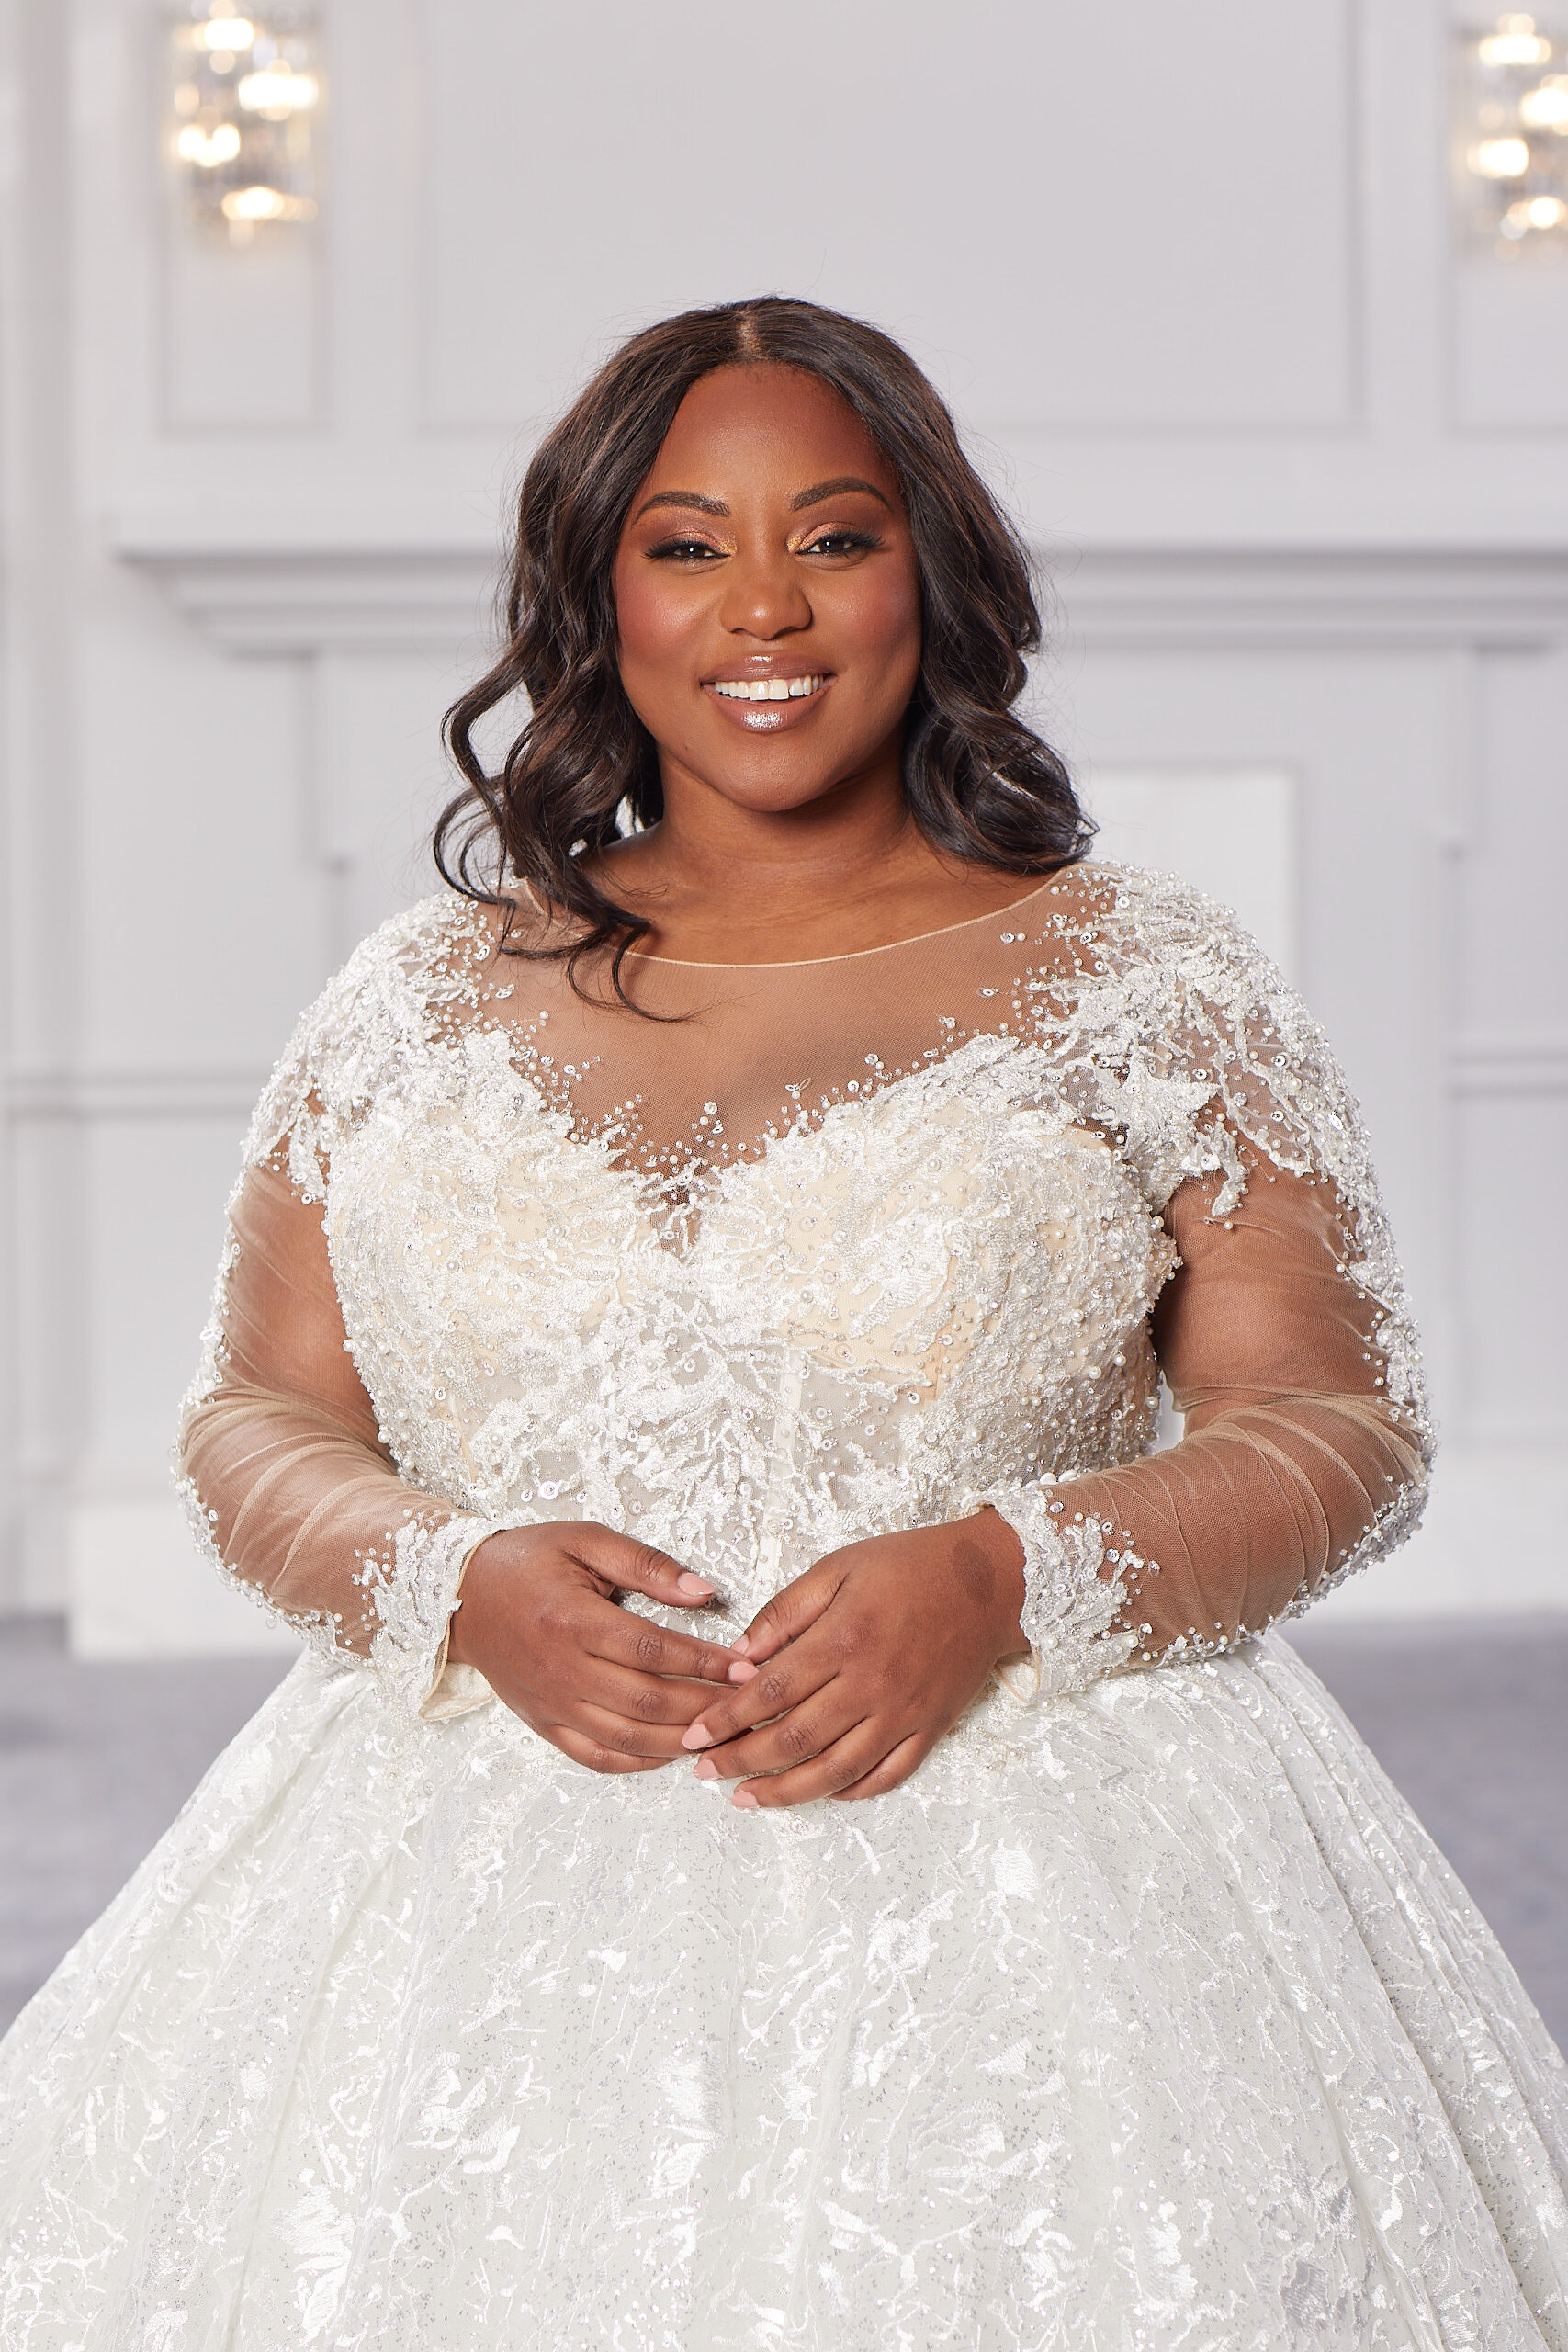 Brides-by-Young-Plus-Size-Bridal-Curvy-Wedding-Dress-New-Jersey-Indiana-Chicago-Illinois-DP_392_0465.jpg